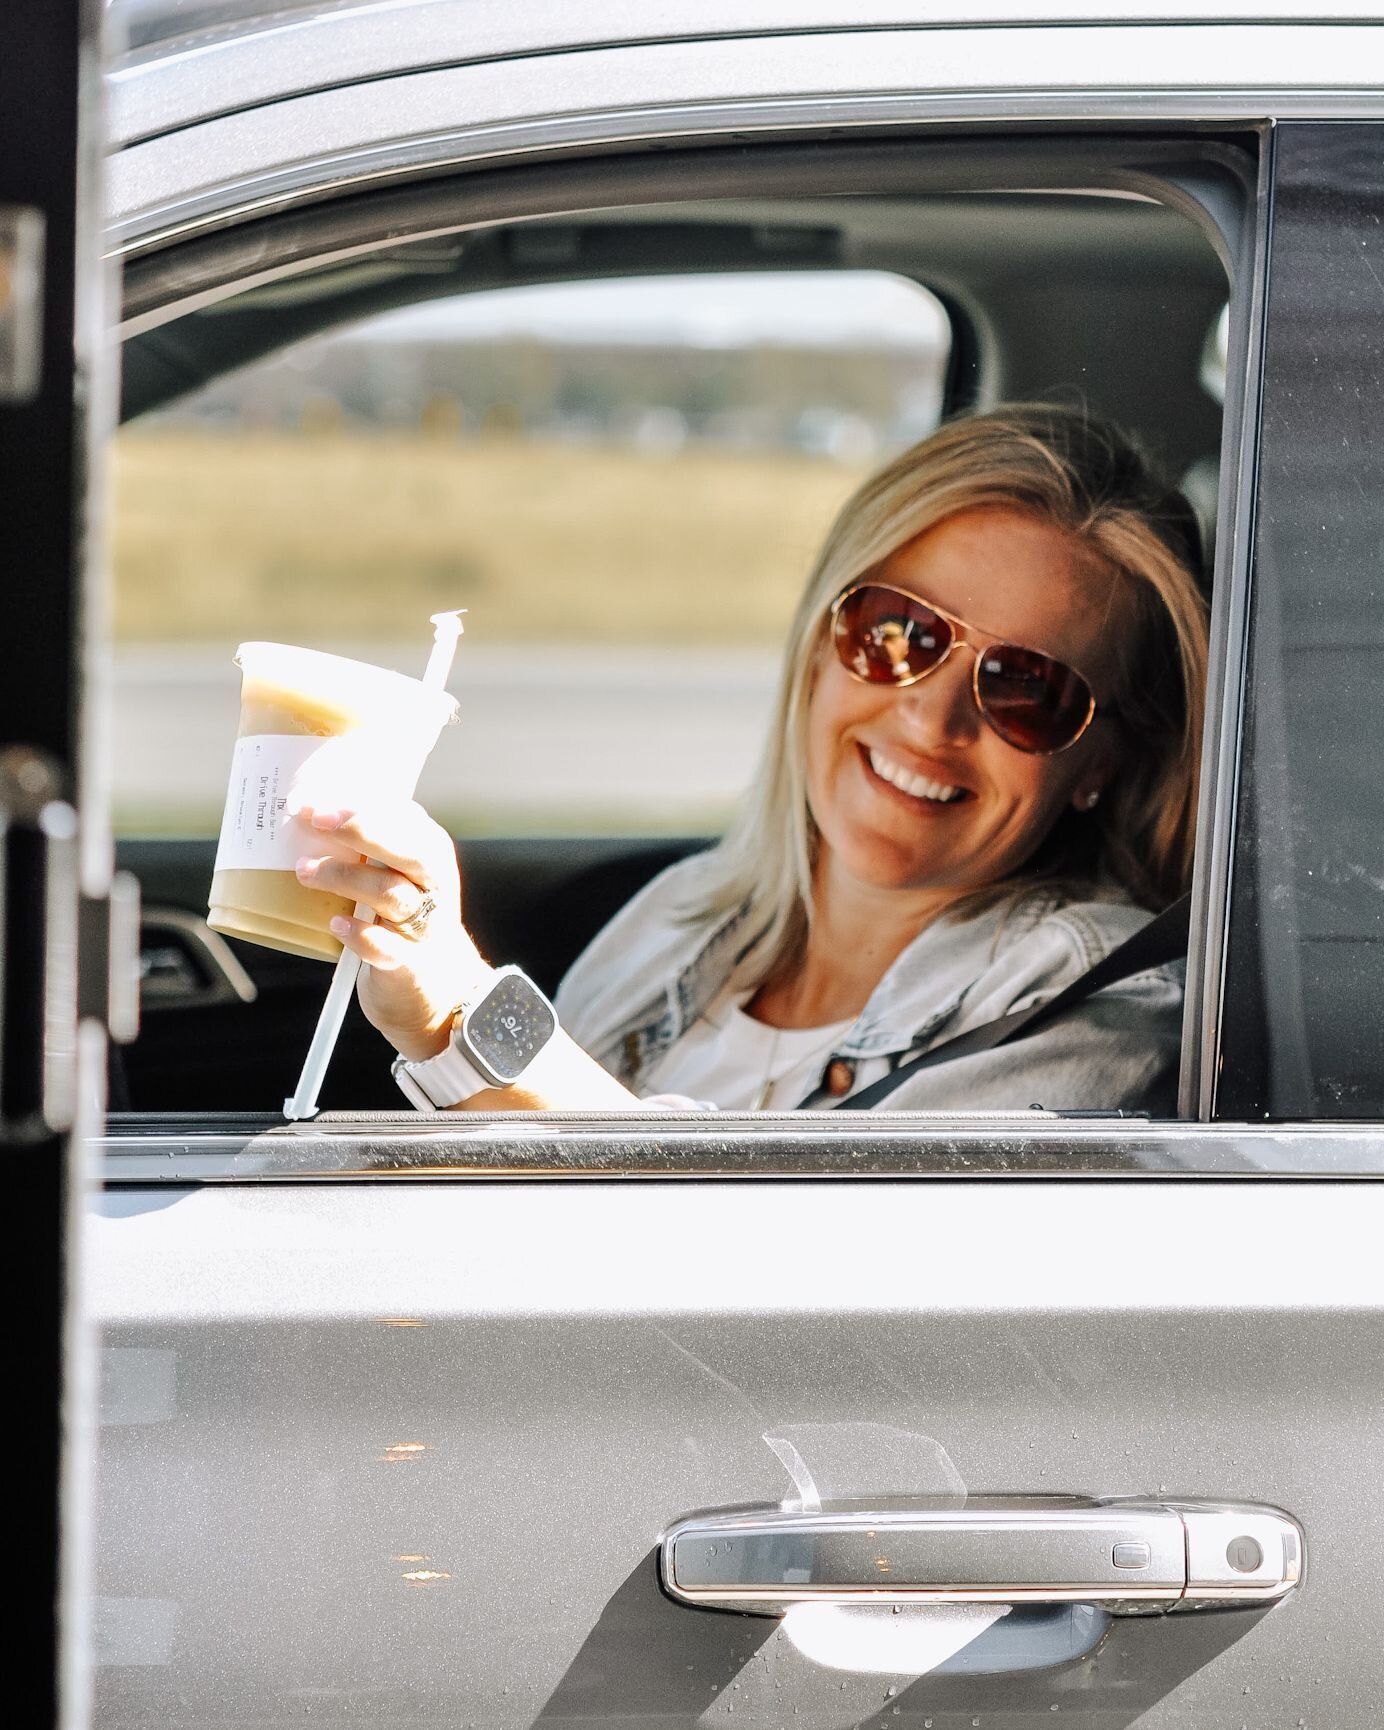 Sable Customer Love: 
Meet Katie - she came through our drive through the other day, bright and cheerful. She had ordered her go-to drink, the Orange Creamsicle Frappe, and when we asked her why she frequents Sable she said she &quot;loves it's locat